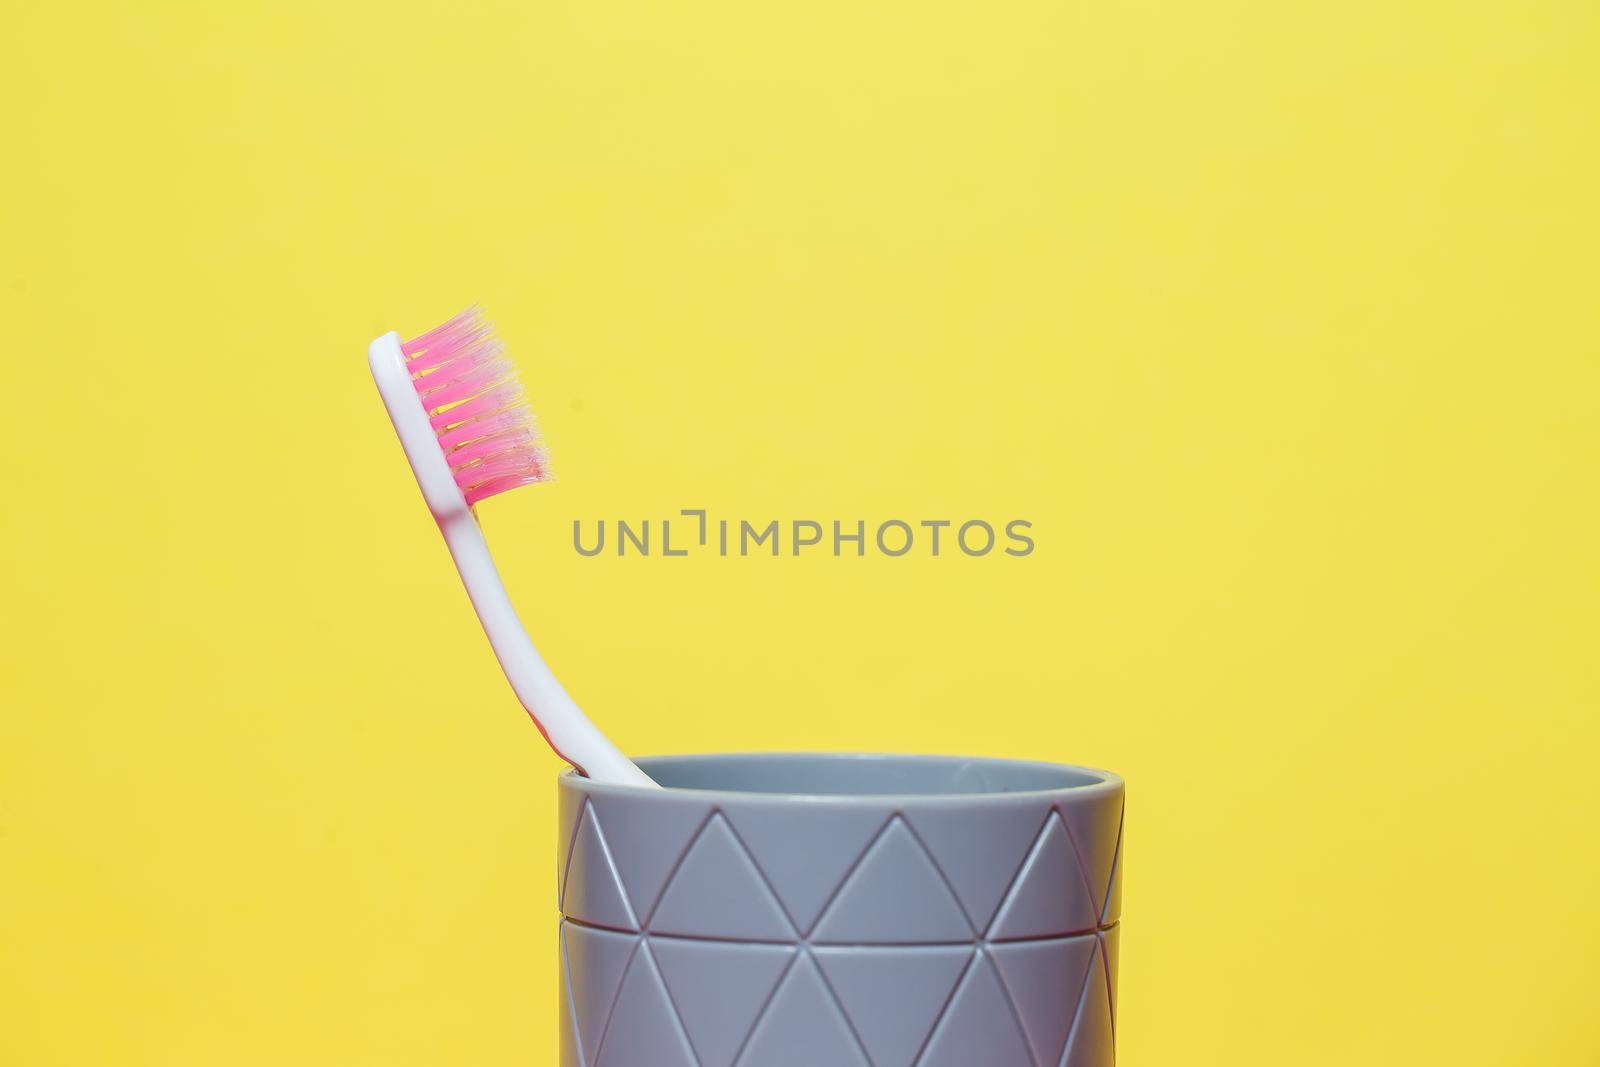 A pink toothbrush is standing in a gray glass. Dental care concept